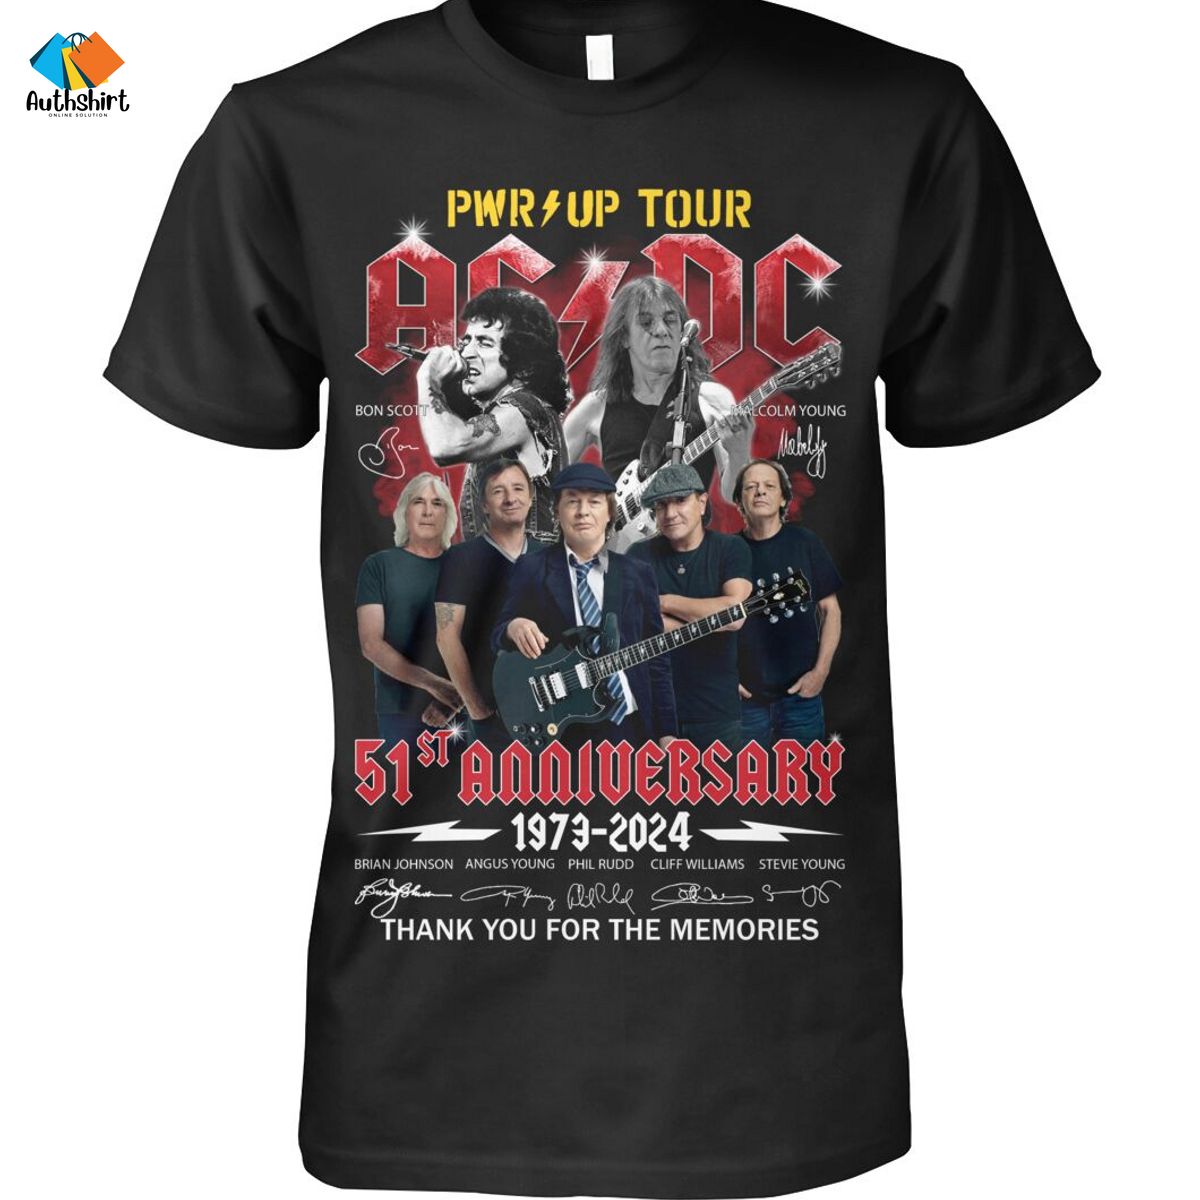 ACDC Pwr Up Tour 51st Anniversary 1973 2024 Shirt